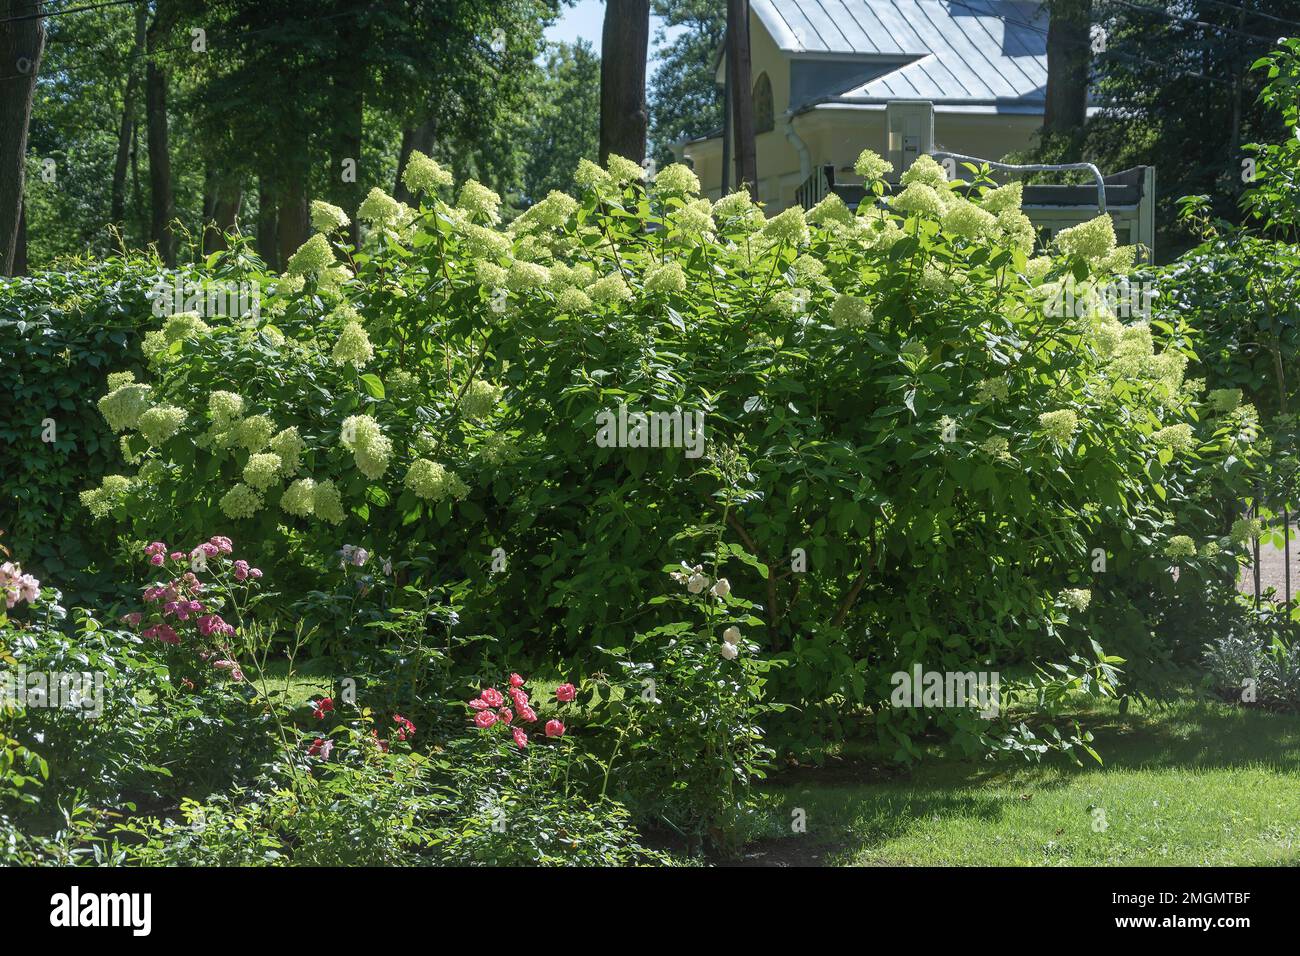 Blooming lush bushes of hydrangea paniculata, in a well-kept garden Stock Photo